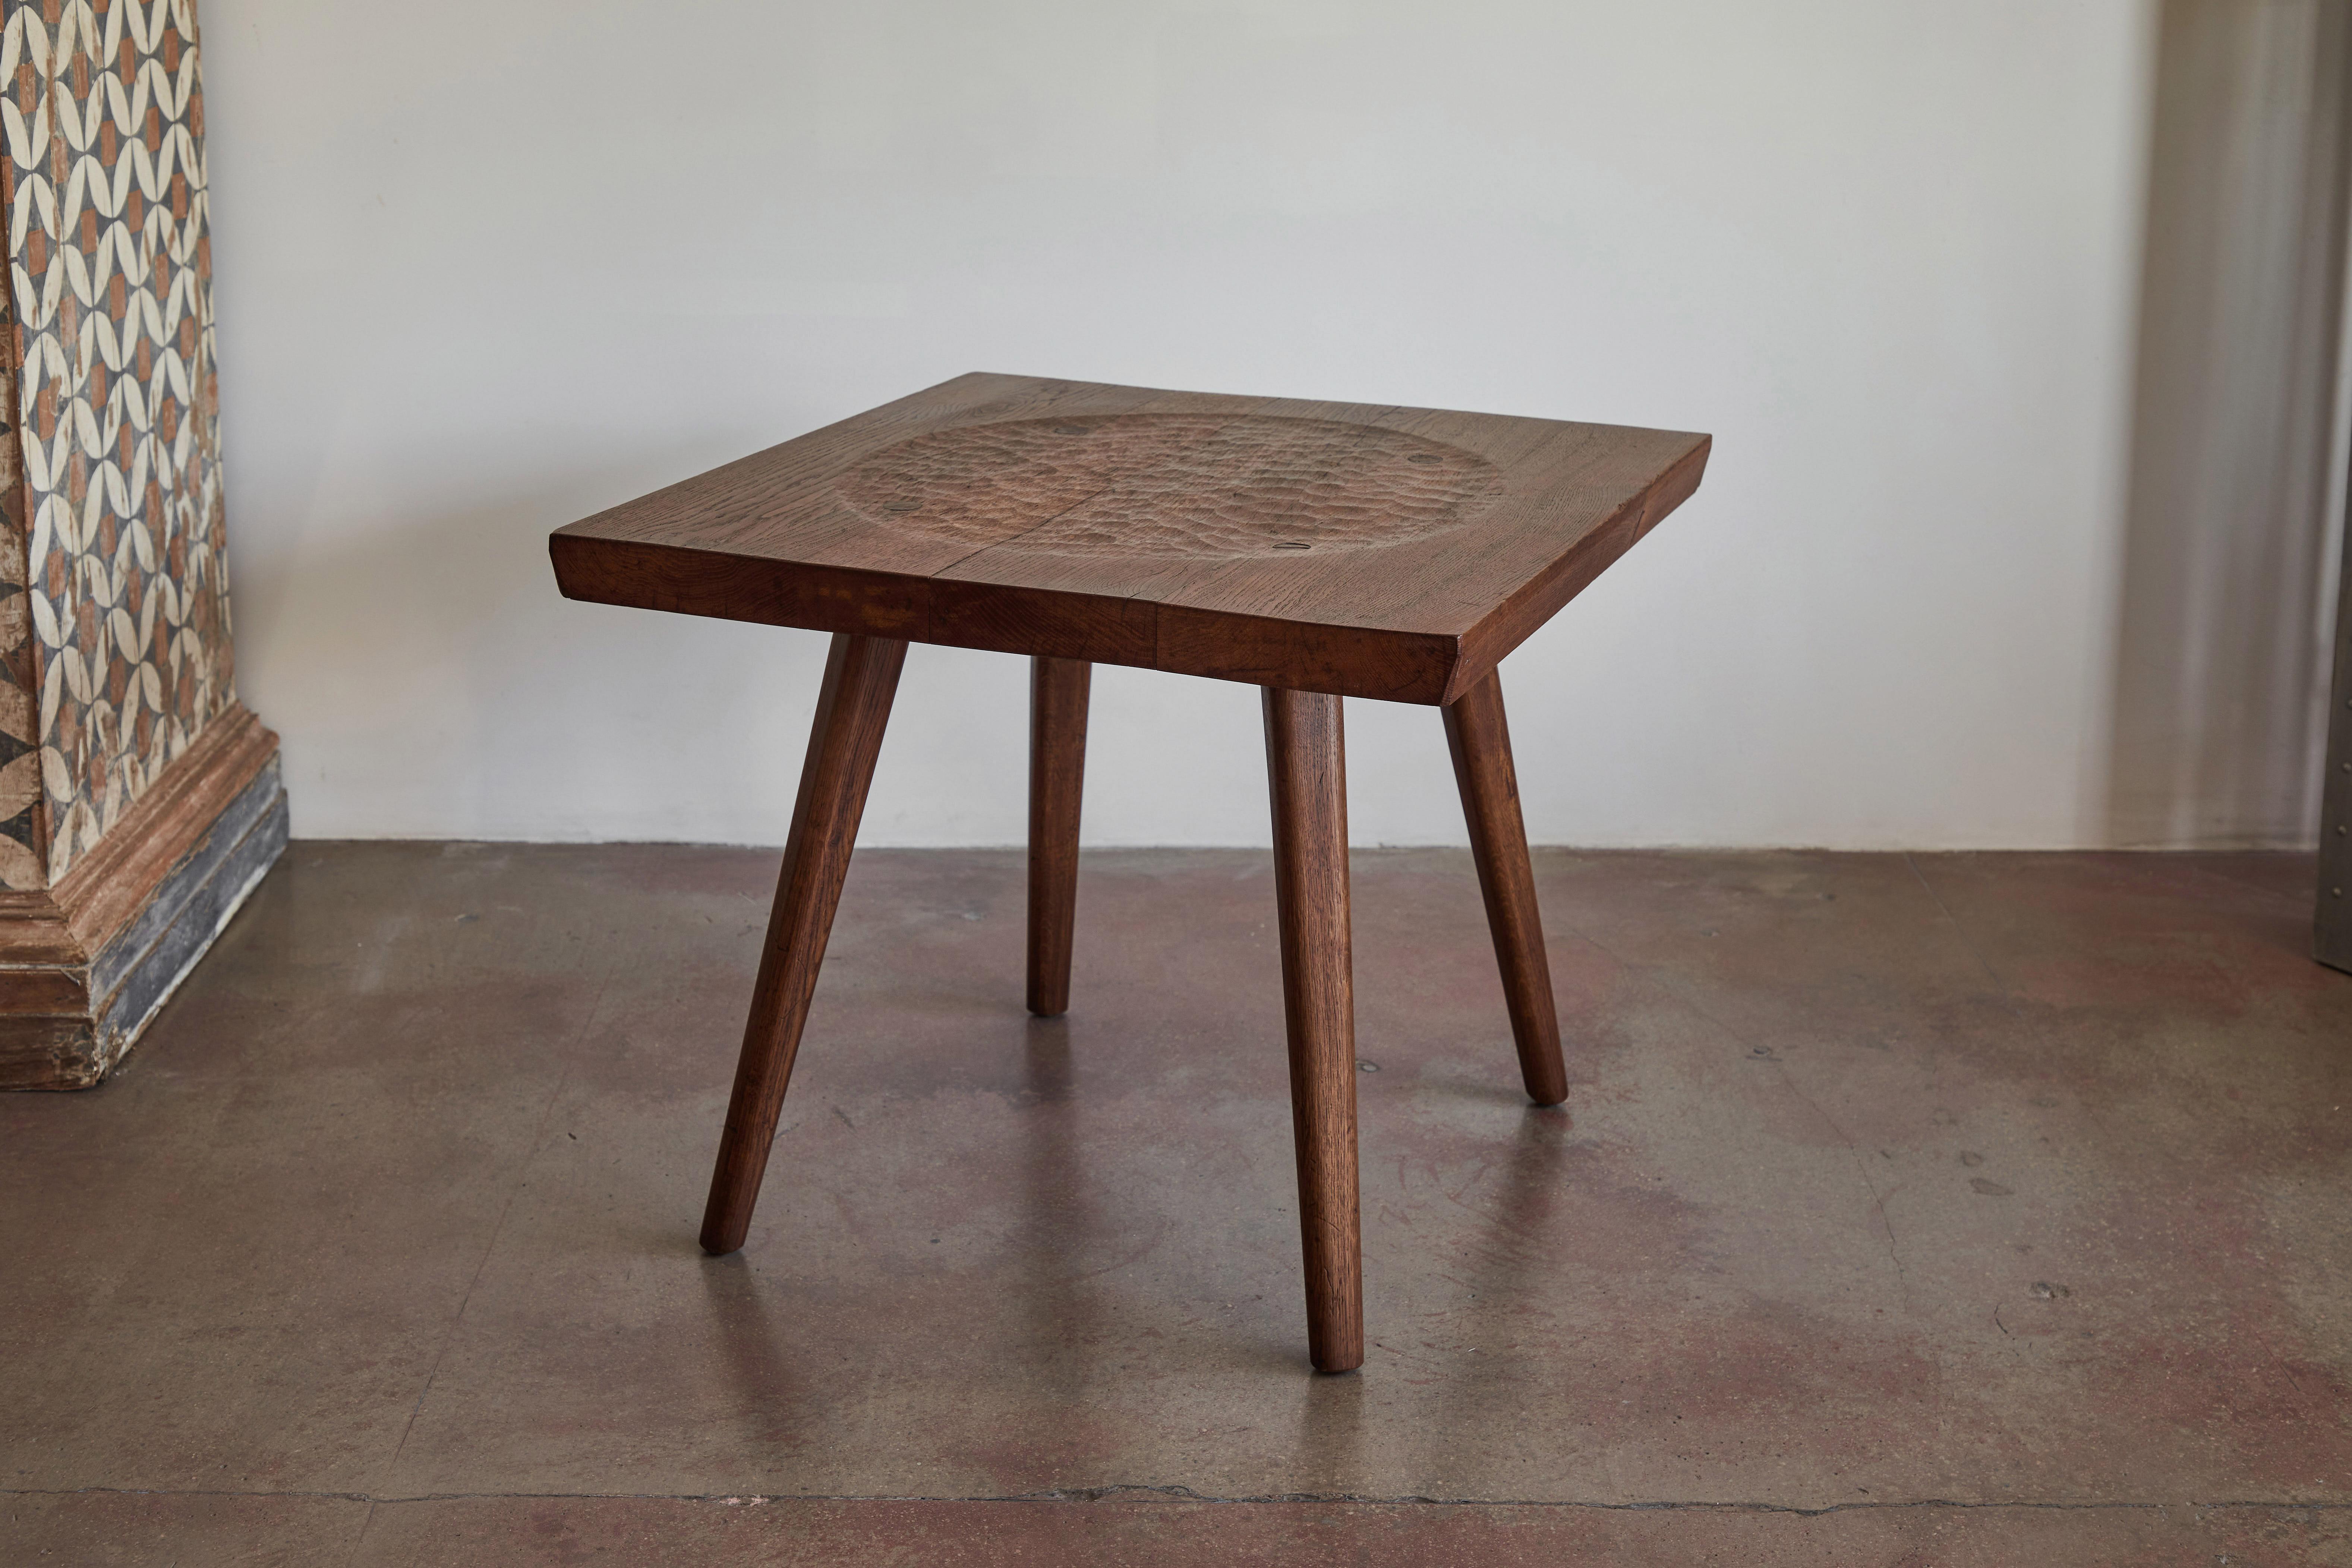 Hand-Carved Carved Oak Side Table by Jean Touret and the Artisans of Marolles